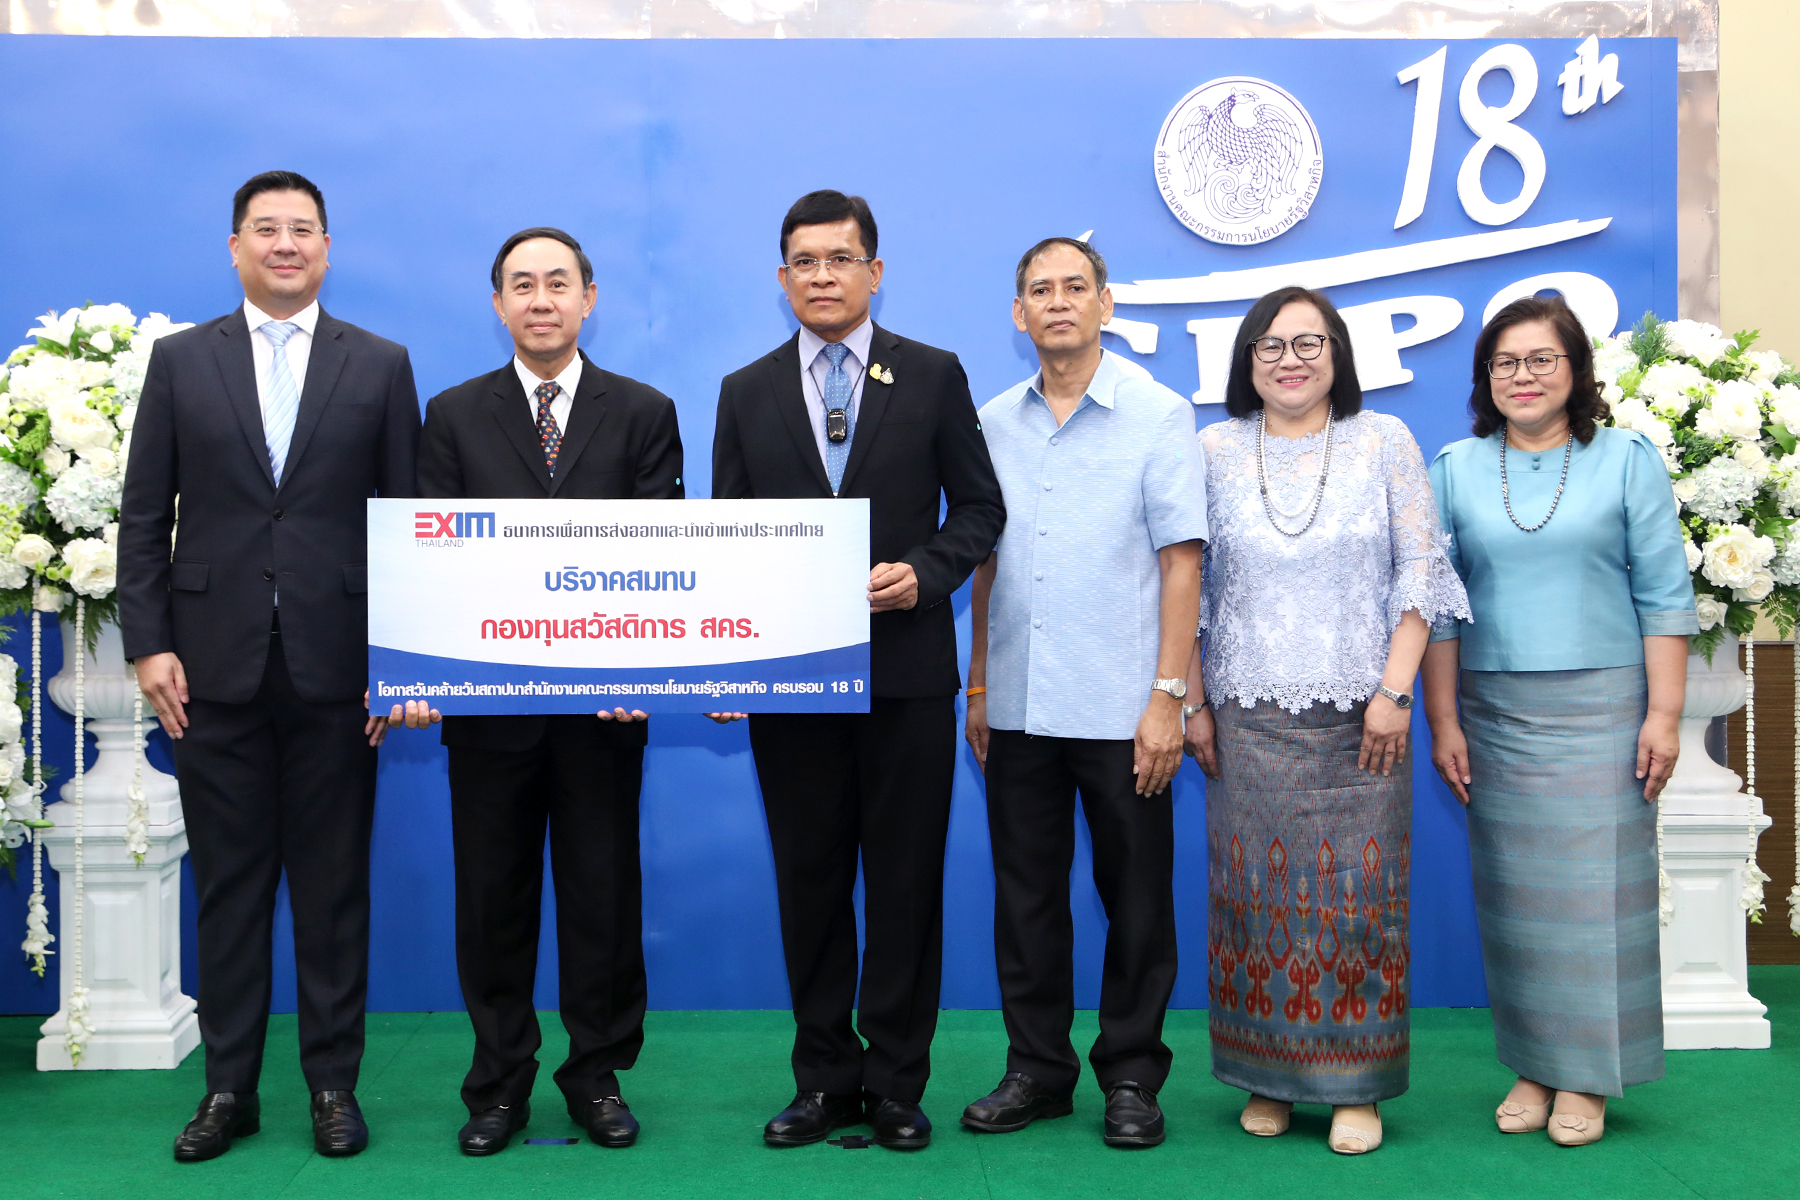 EXIM Thailand Congratulates 18th Anniversary of State Enterprise Policy Office